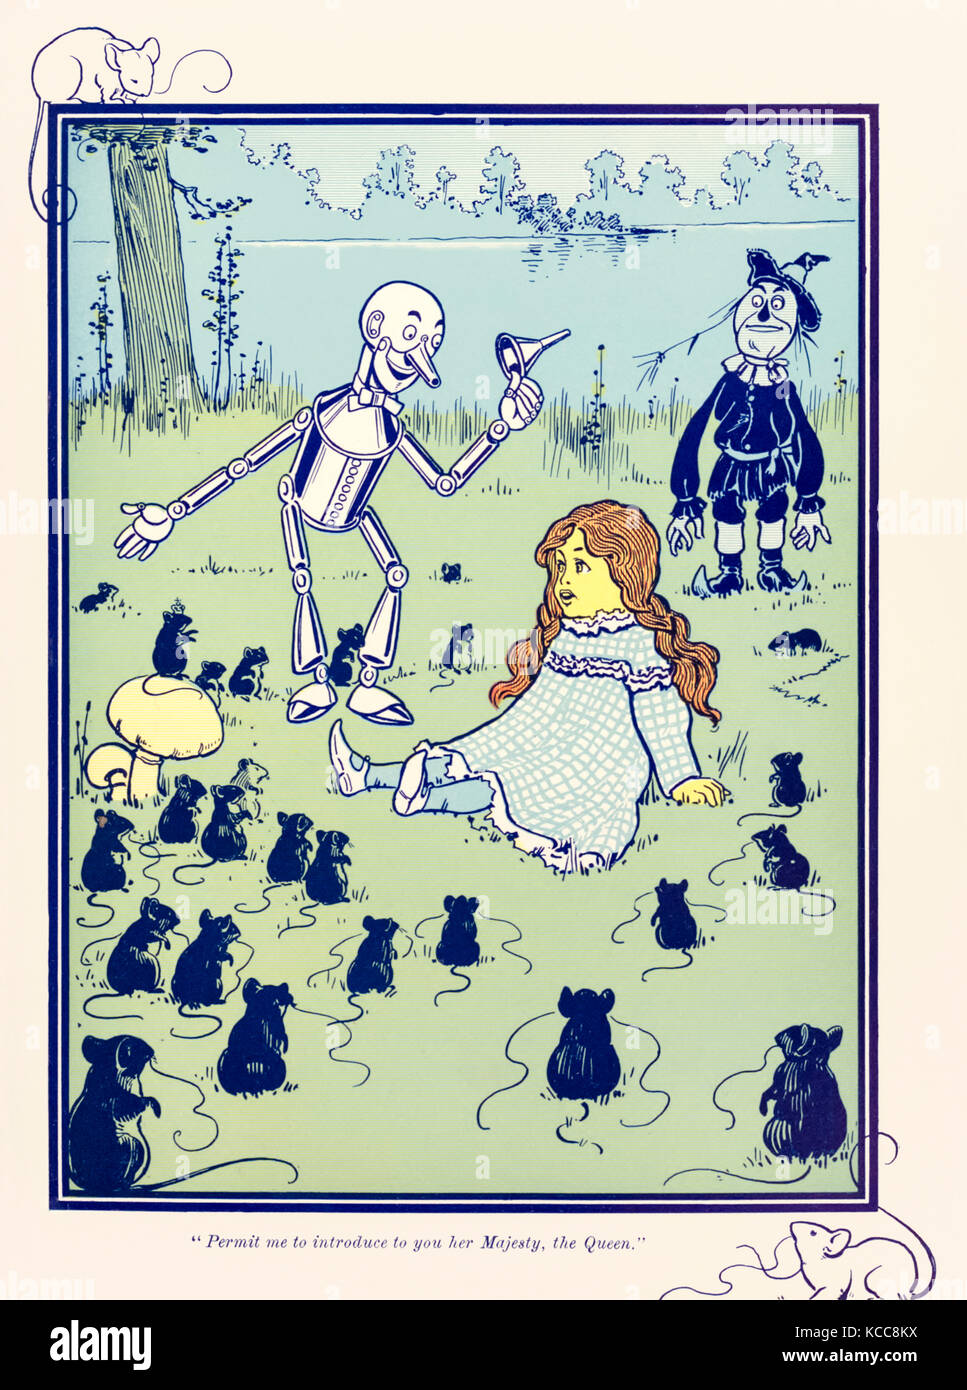 “Permit me to introduce to you her Majesty, the Queen.” from ‘The Wonderful Wizard of Oz’ by L. Frank Baum (1856-1919) with pictures by W. W. Denslow (1856-1915). See more information below. Stock Photo